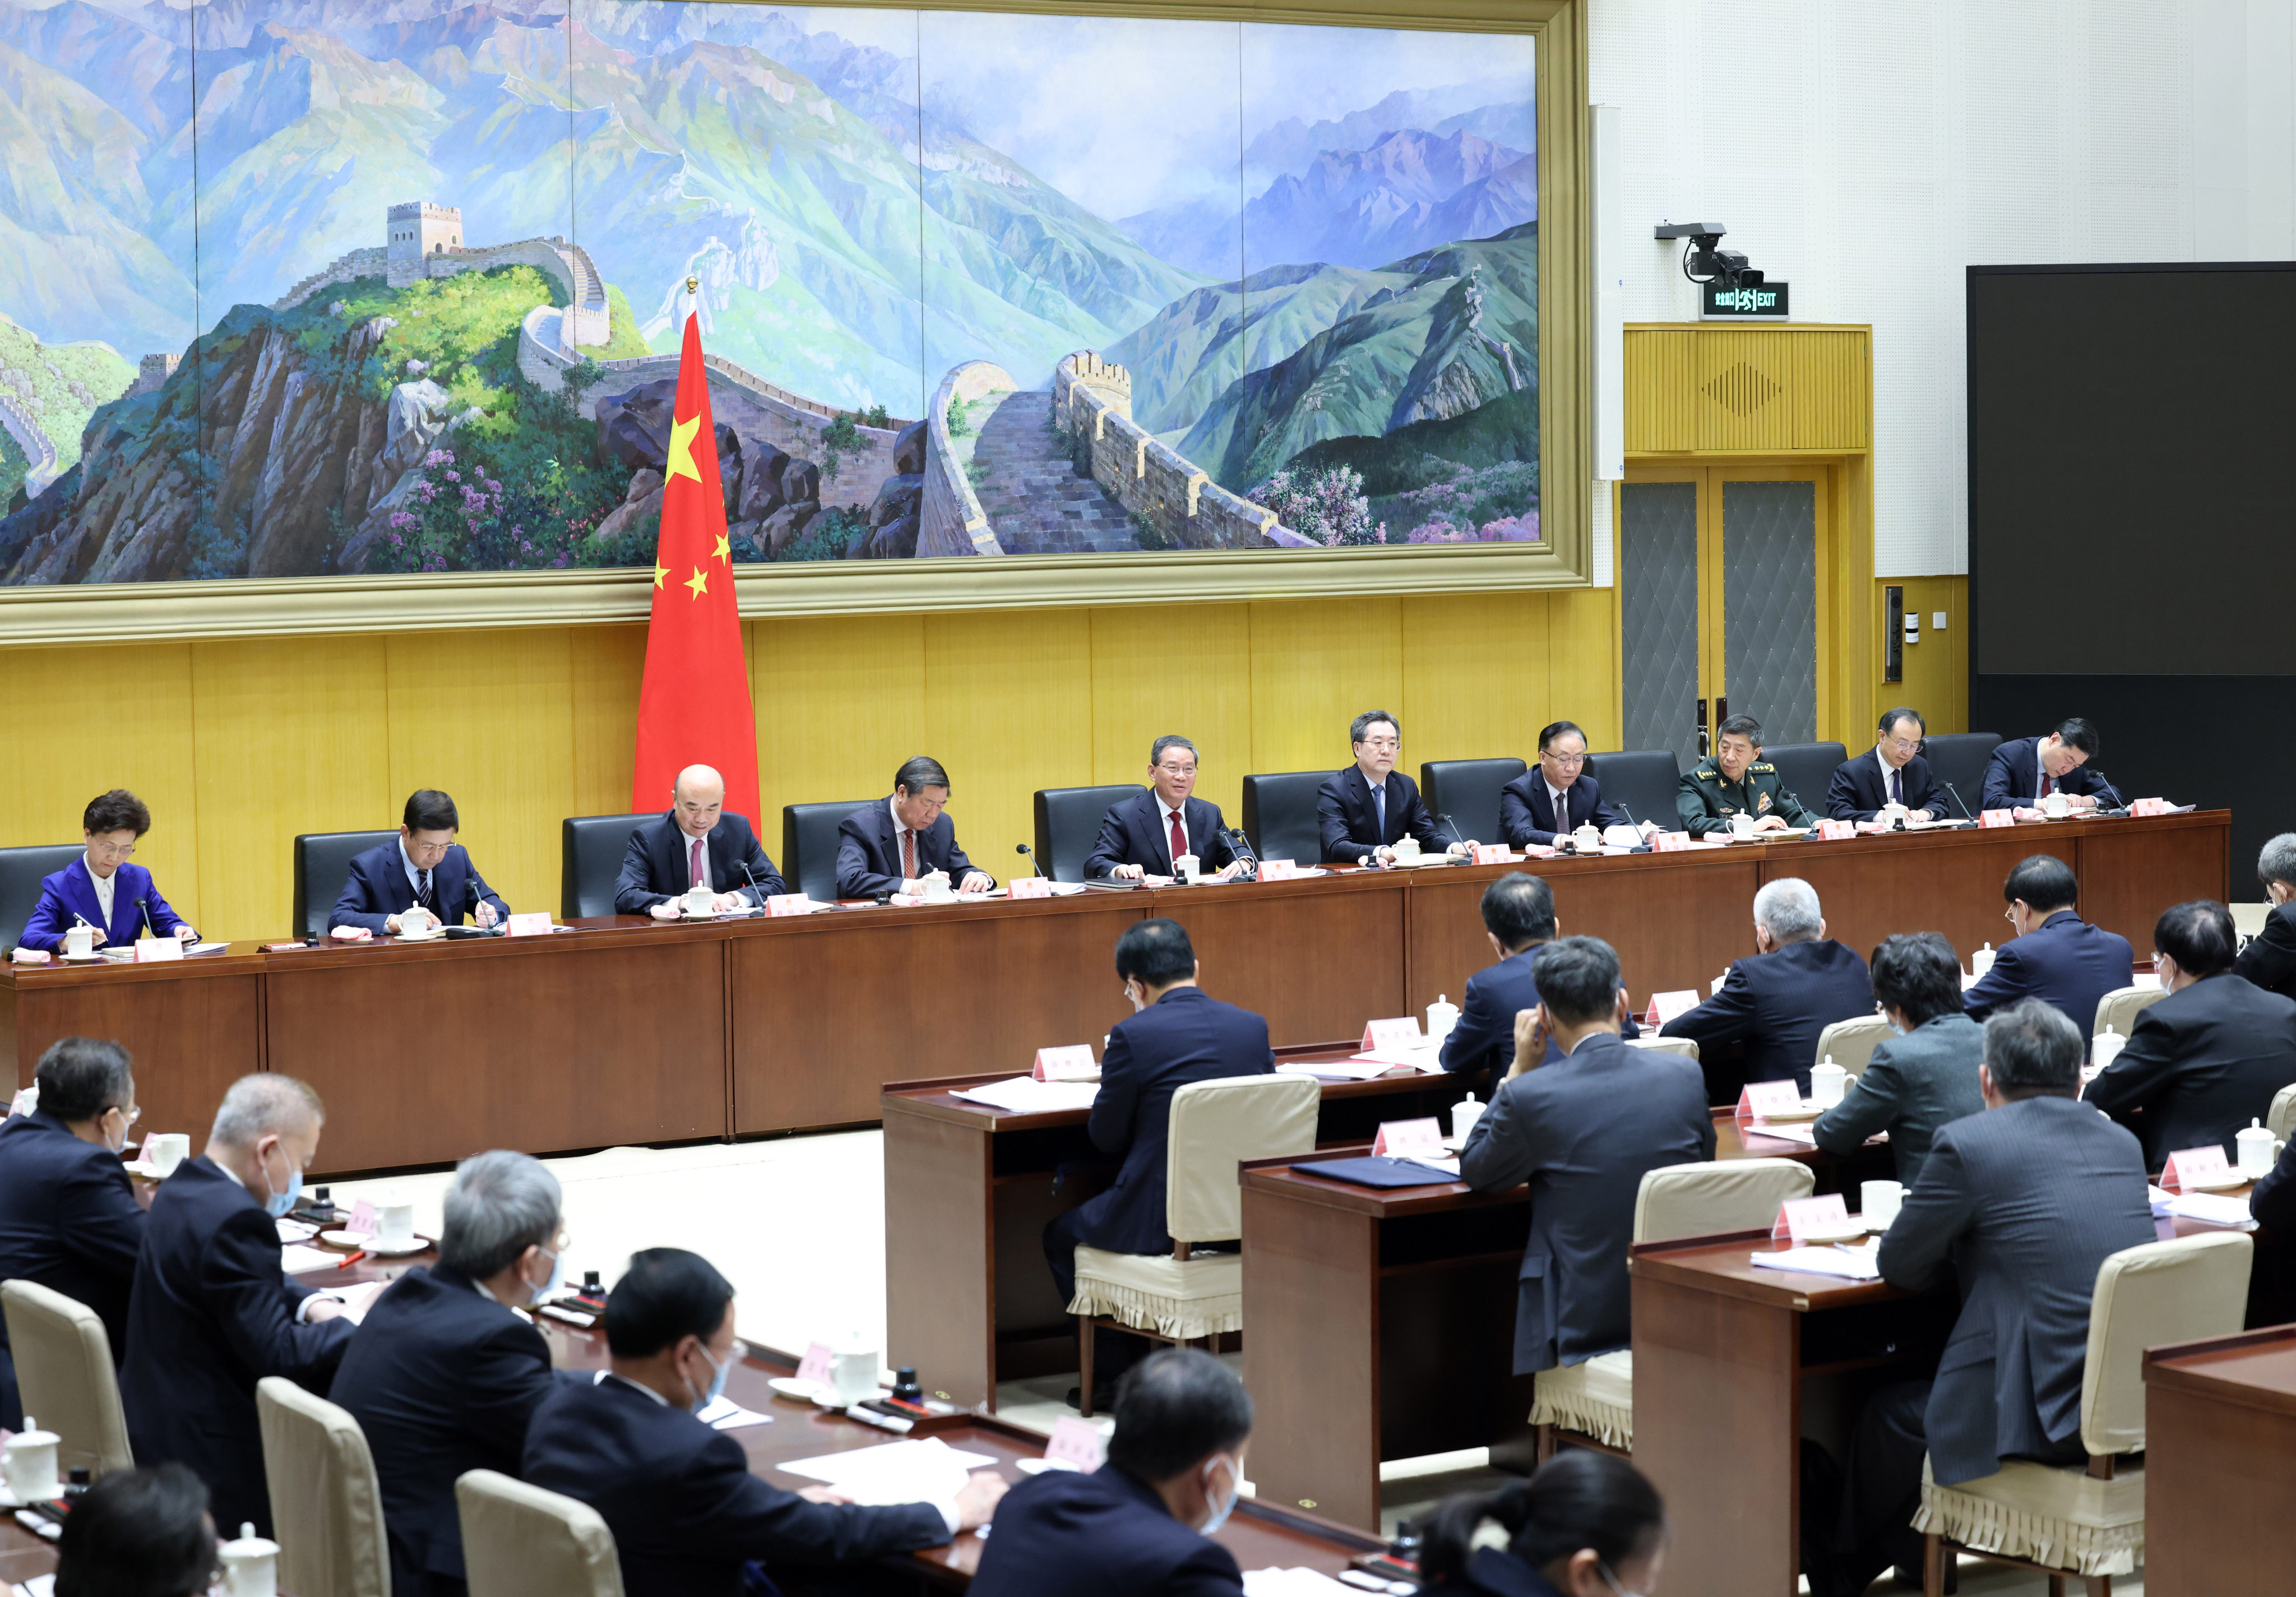 Amended working rules released by China’s cabinet have removed previous provisions that ensured transparency. Photo: Xinhua